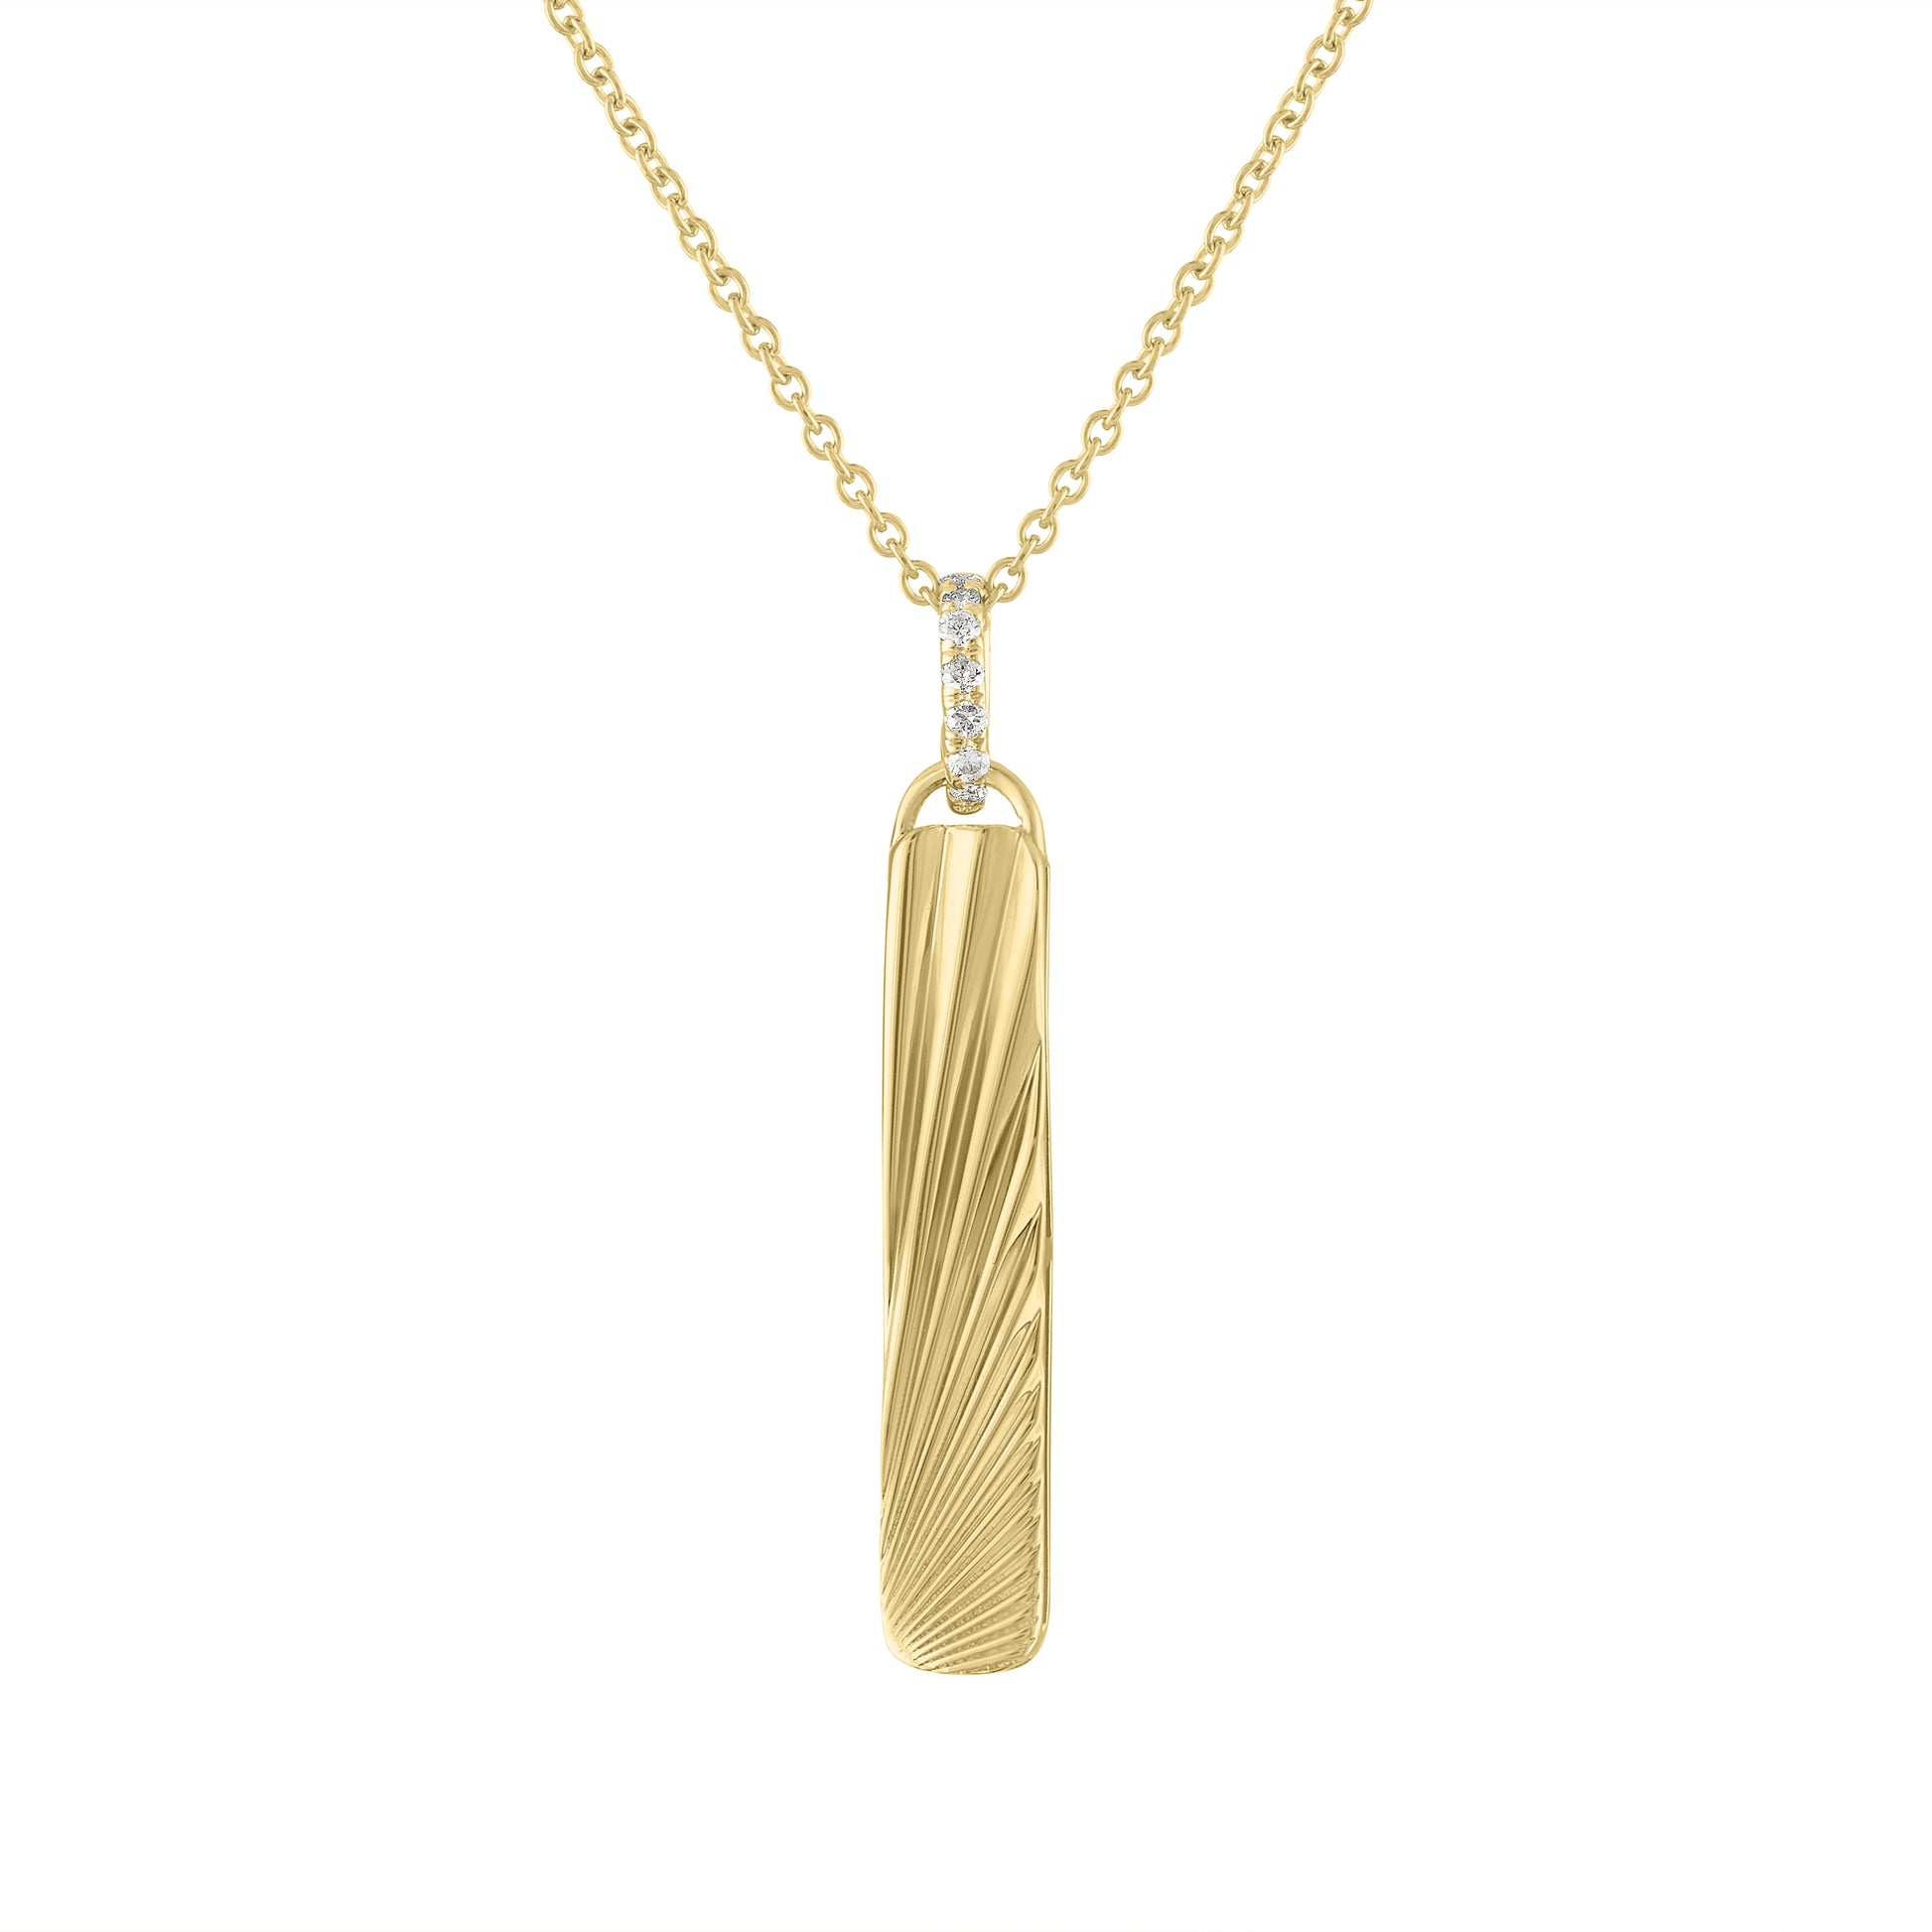 Yellow gold small fluted dogtag with a diamond bail. 